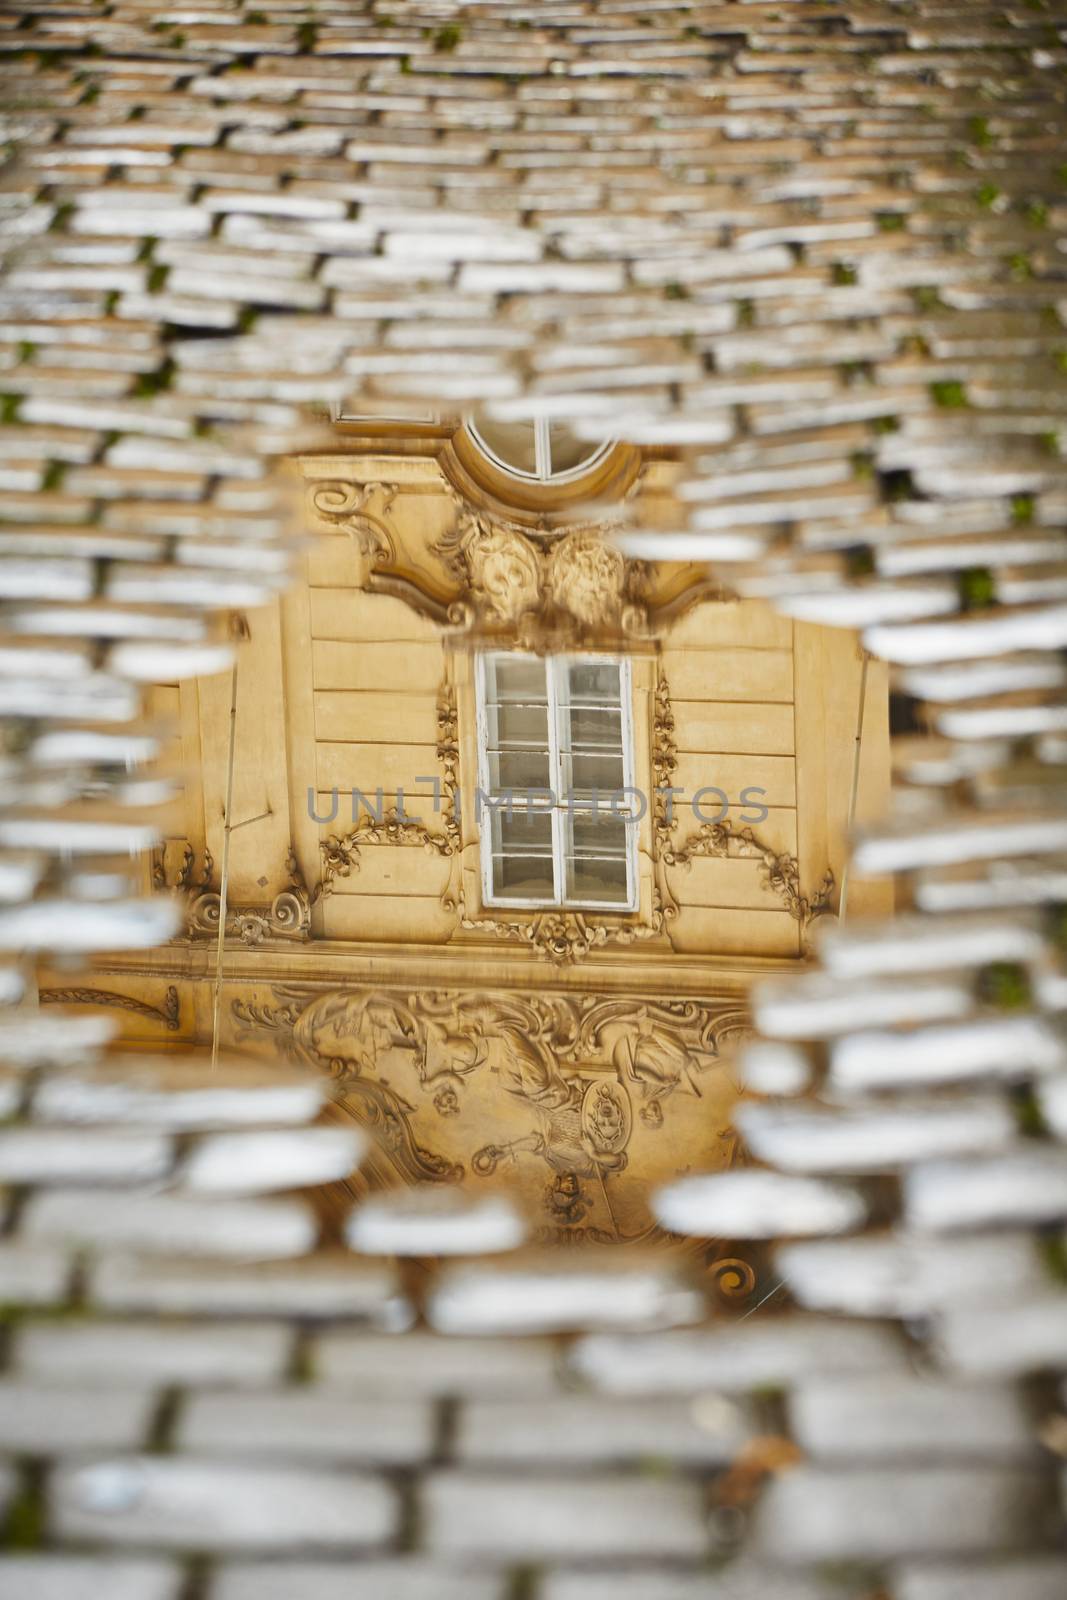 After rain in Prague - reflection of the house in puddle